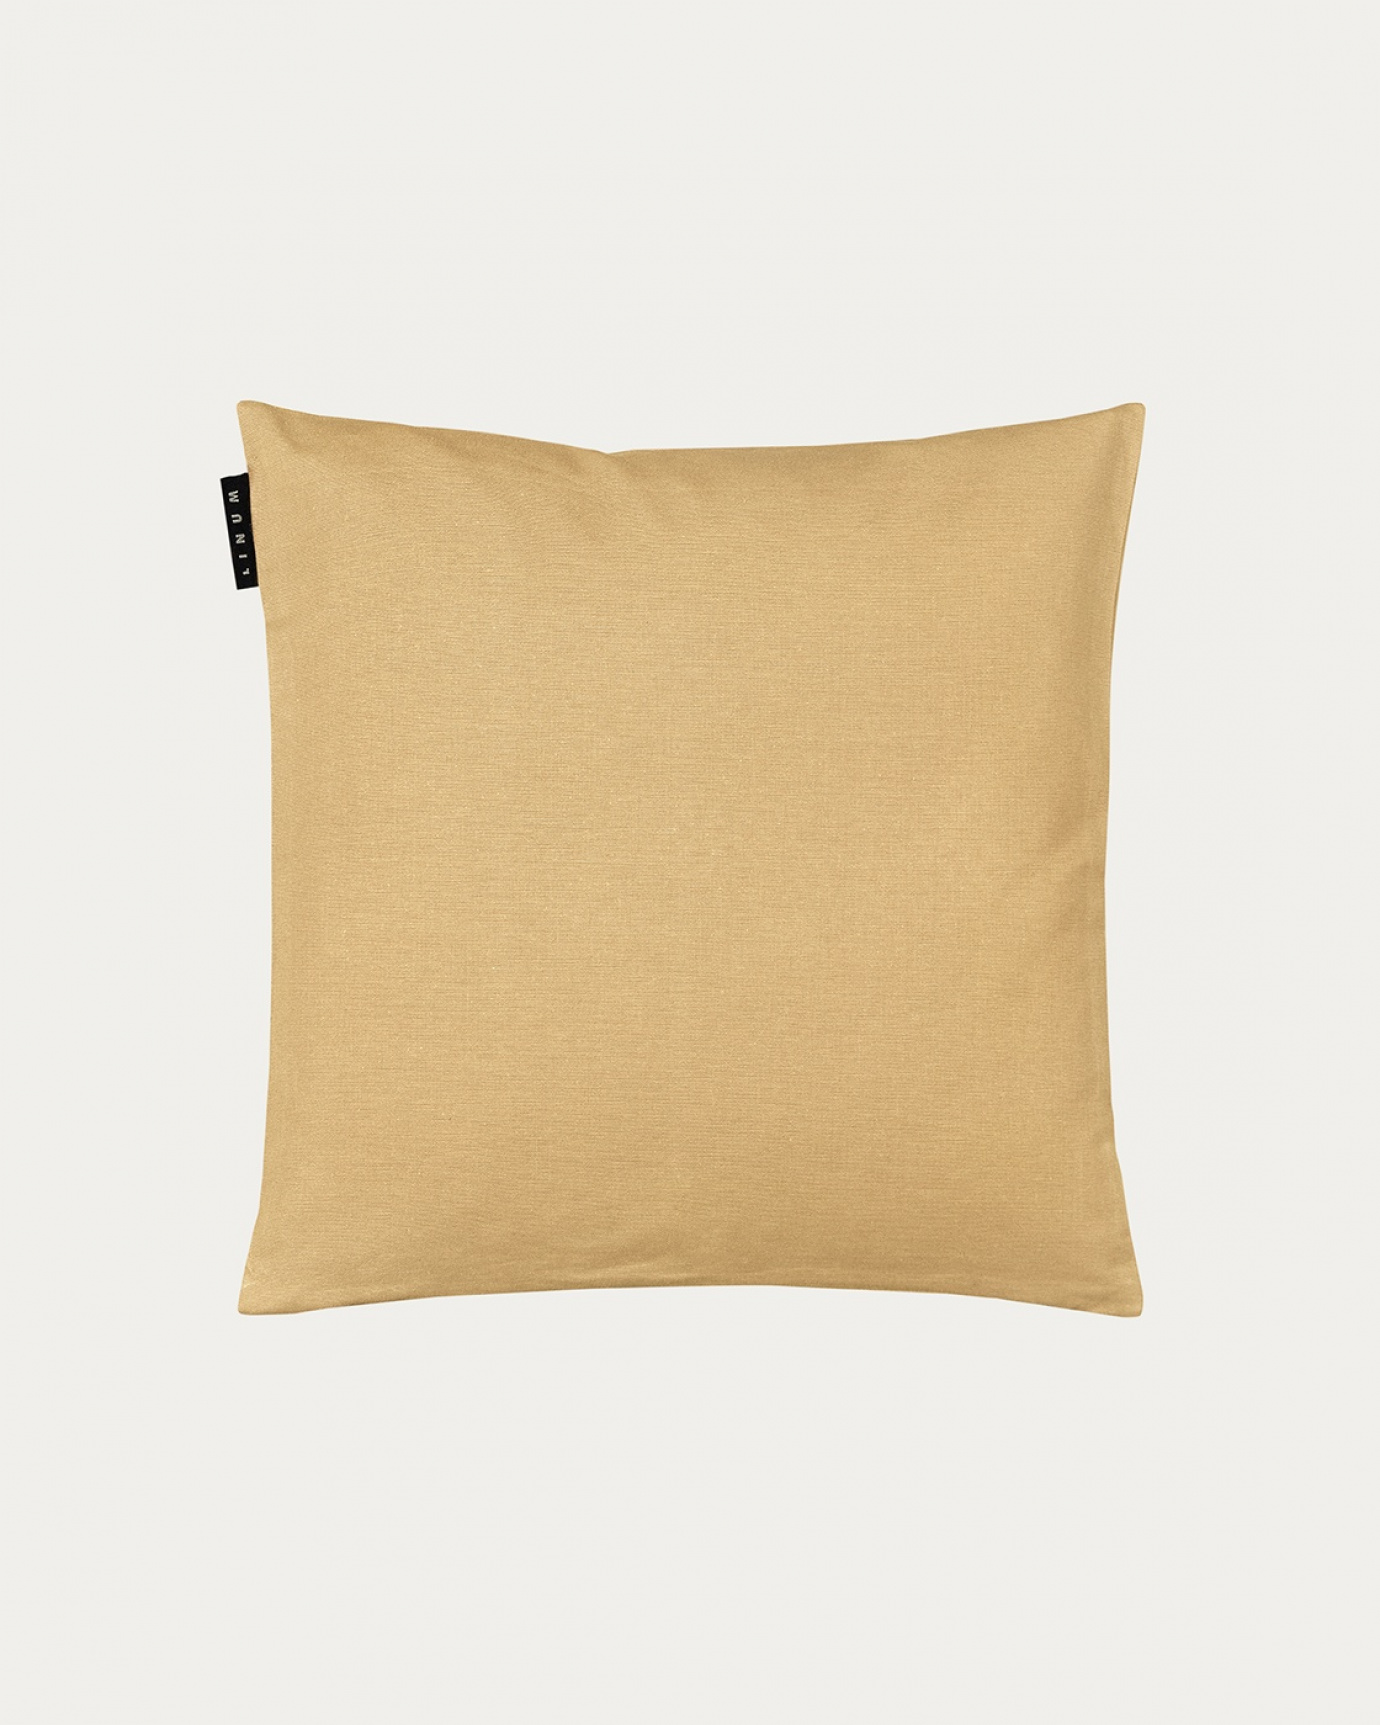 Product image straw yellow ANNABELL cushion cover made of soft cotton from LINUM DESIGN. Size 40x40 cm.